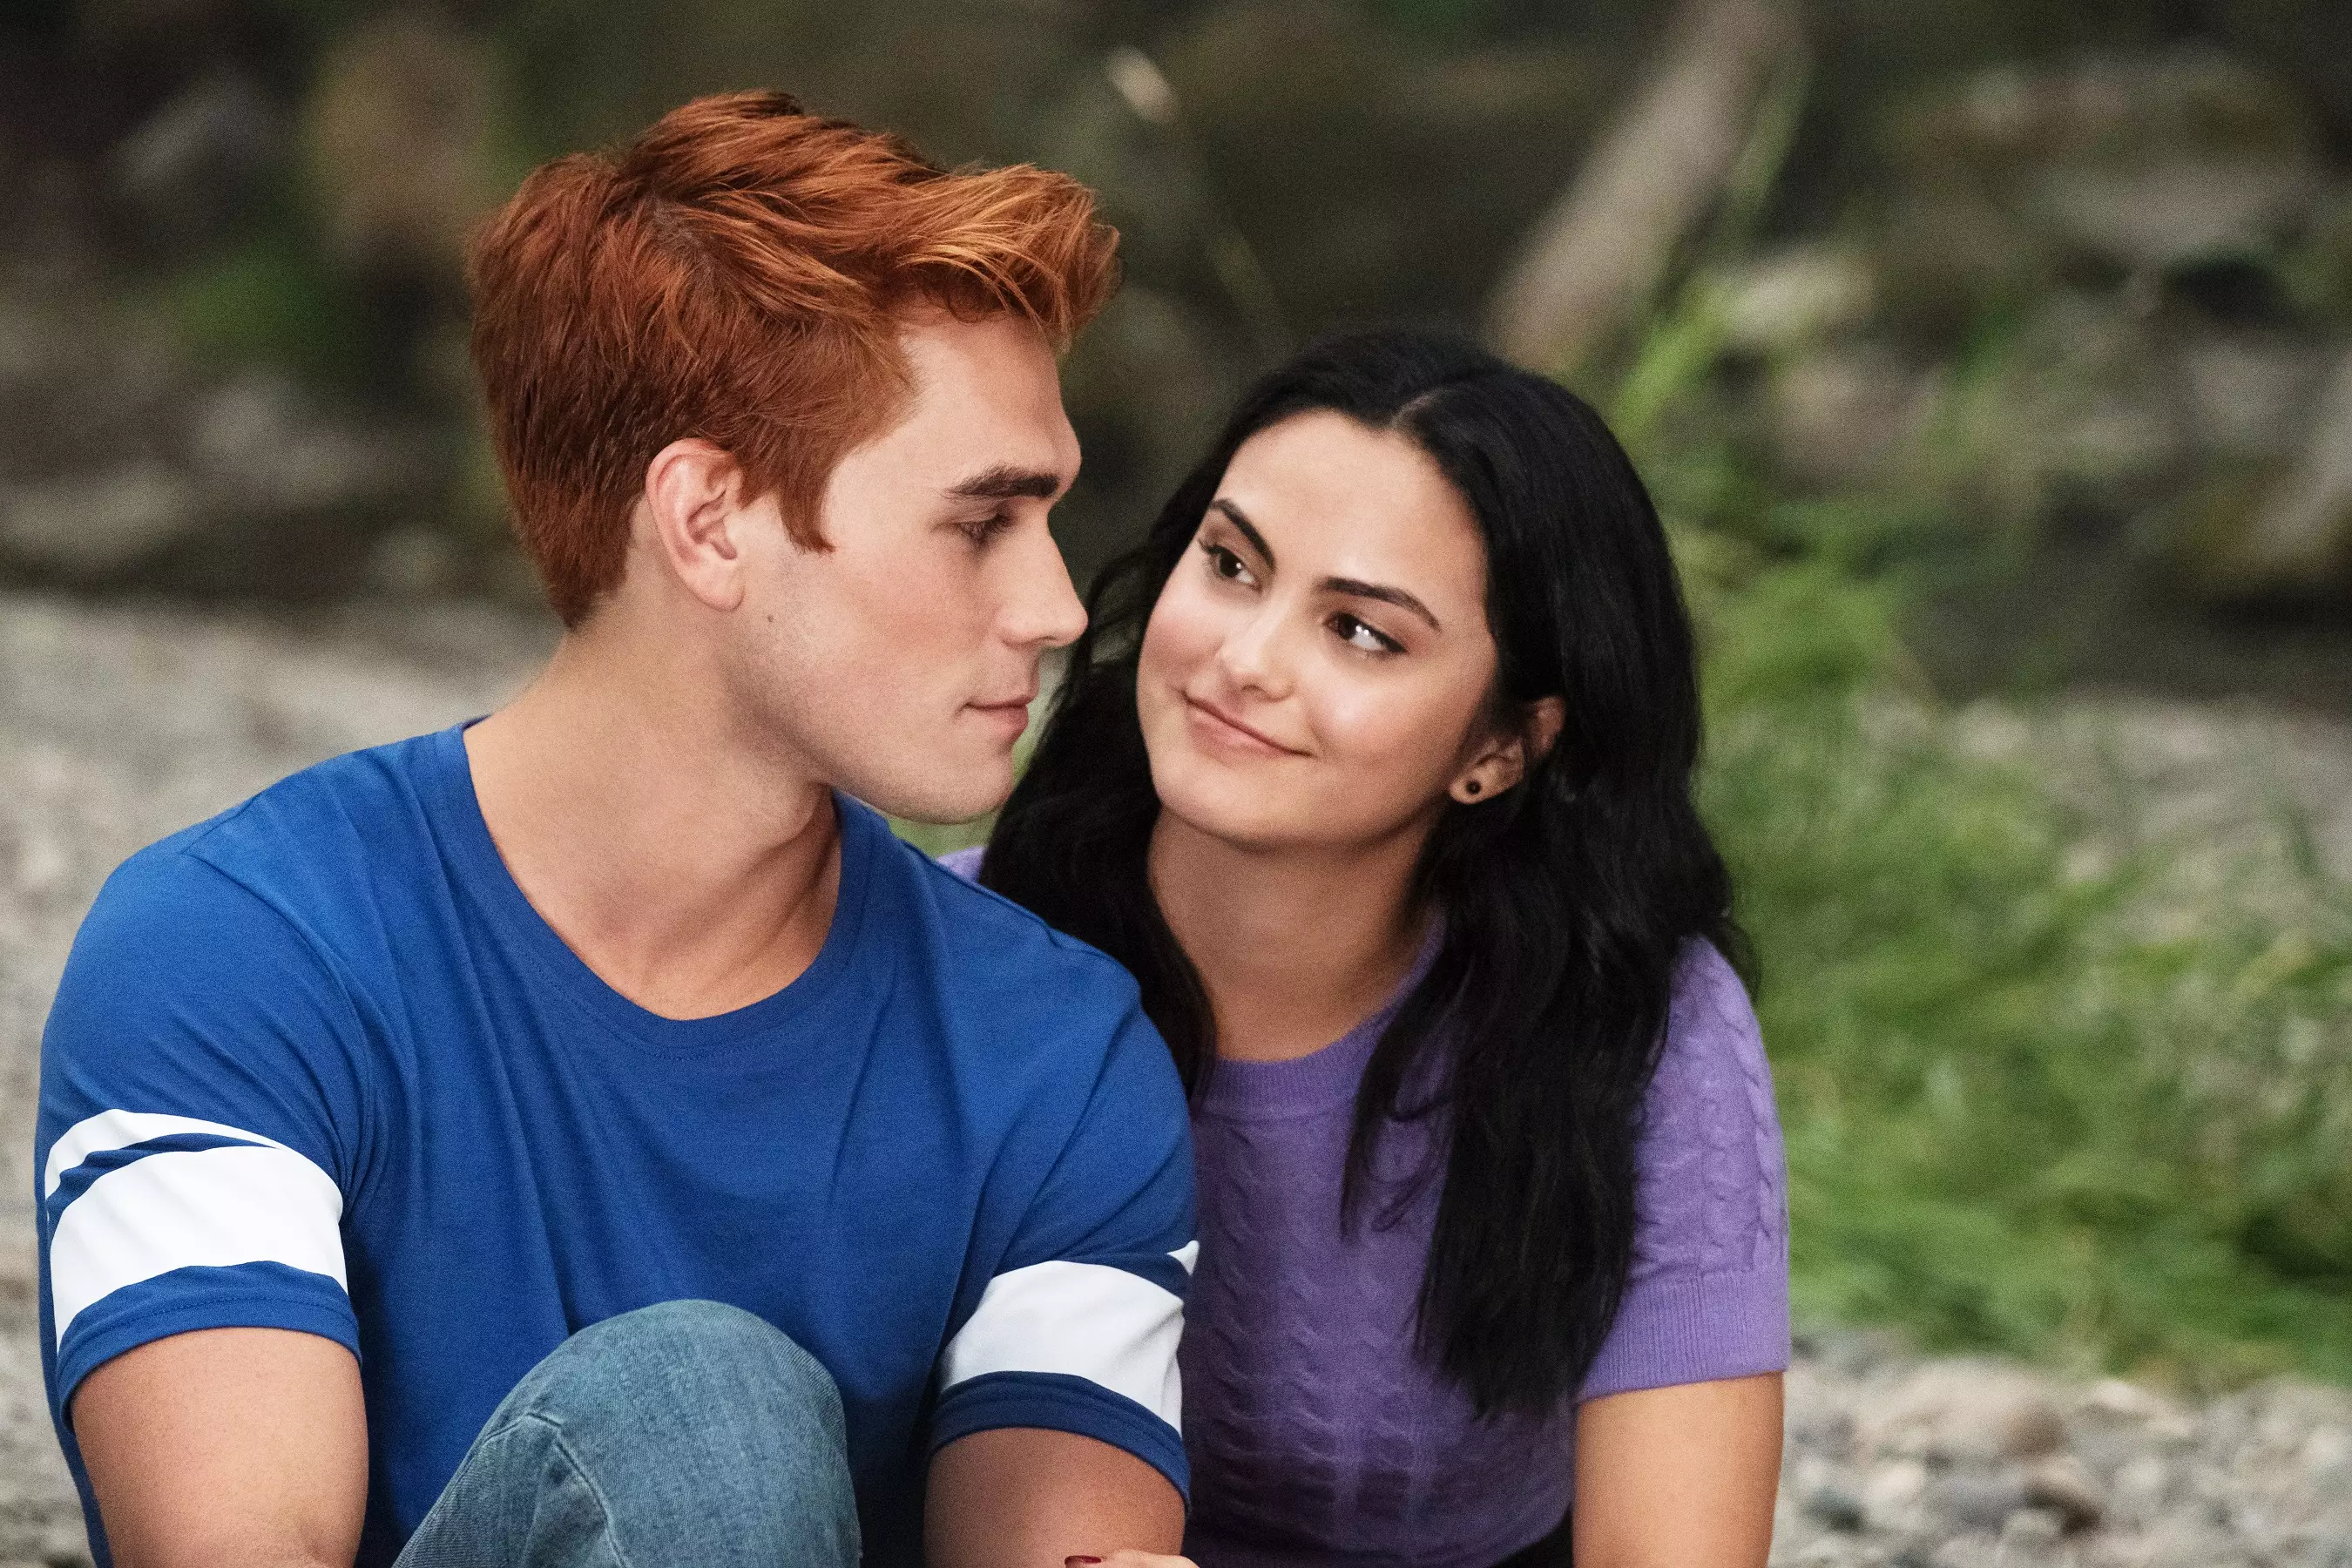 KJ Apa and Camila Mendes are expected to return (